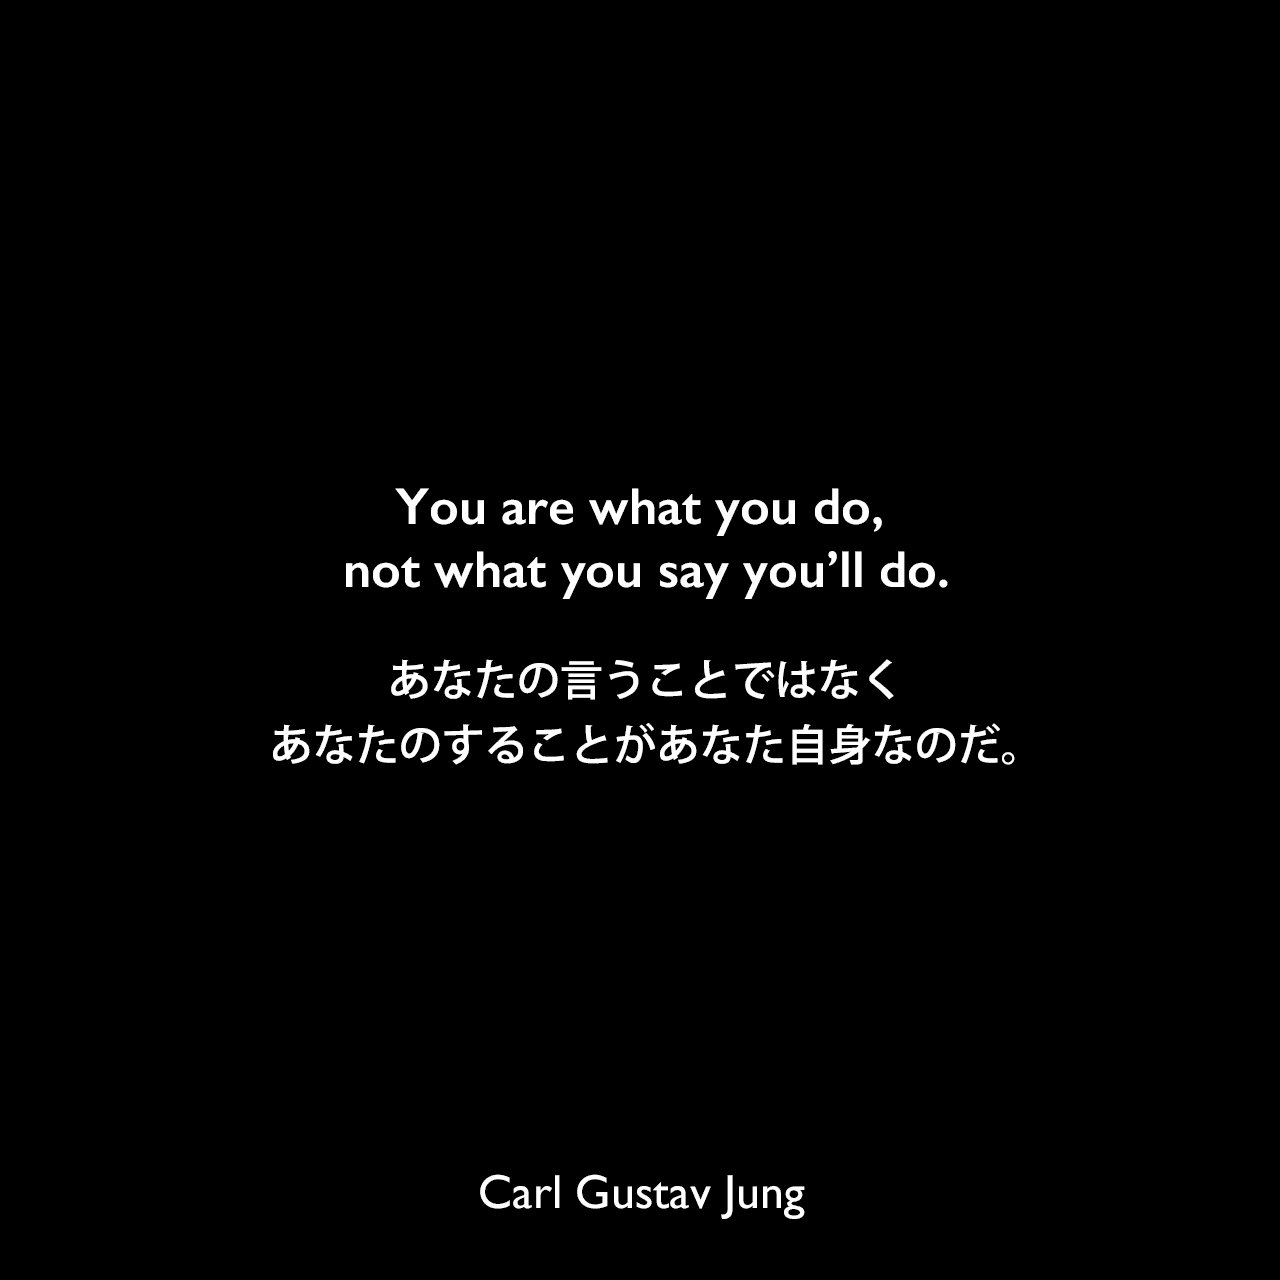 You are what you do, not what you say you’ll do.あなたの言うことではなく、あなたのすることがあなた自身なのだ。